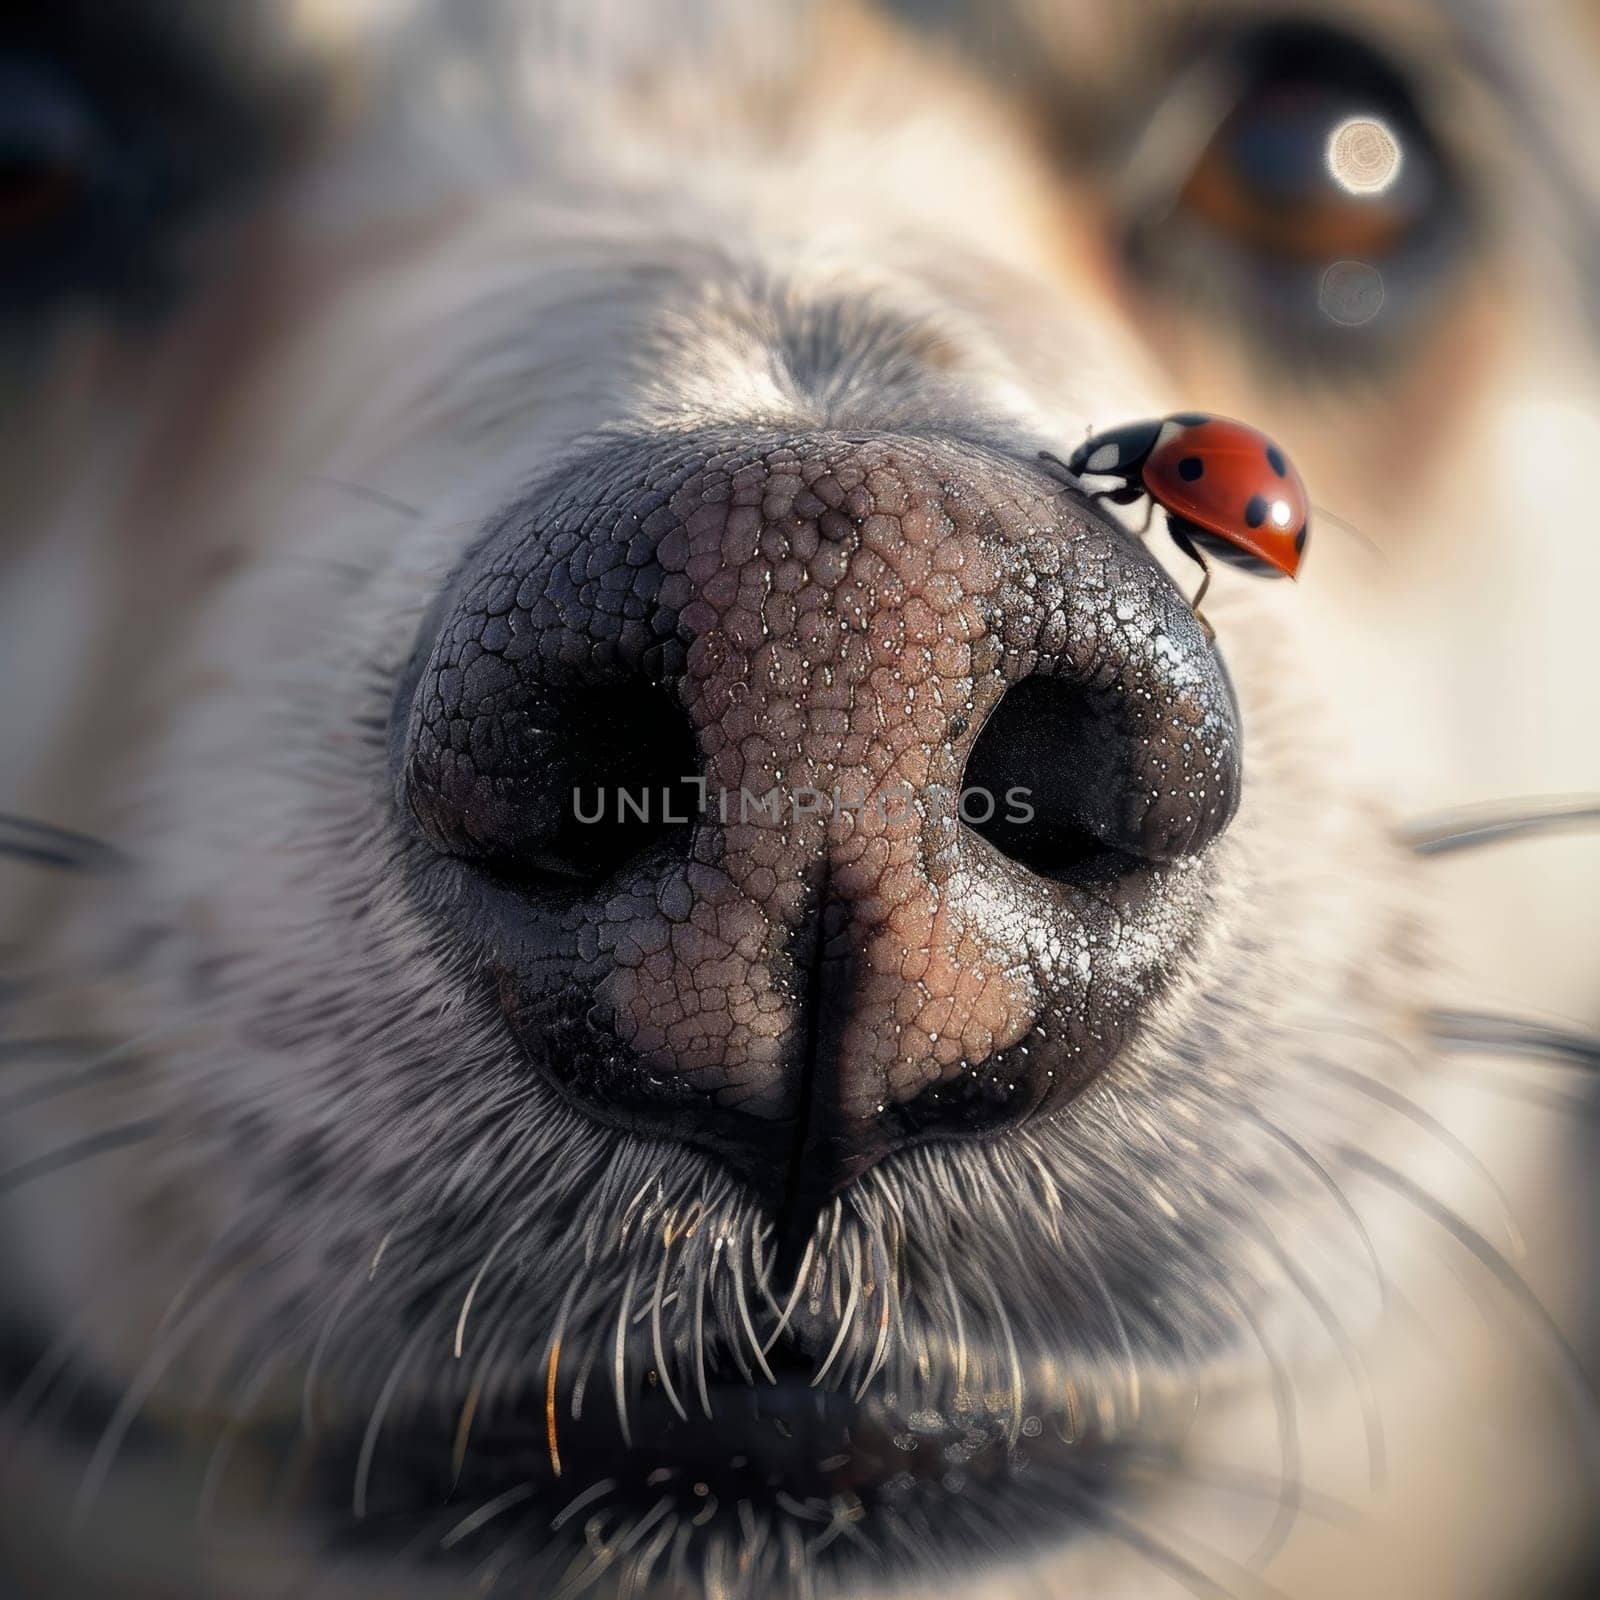 A ladybug ventures across the snout of a dog, its red and black shell standing out against the dog's textured skin. The image captures a charming interaction in nature.. by sfinks